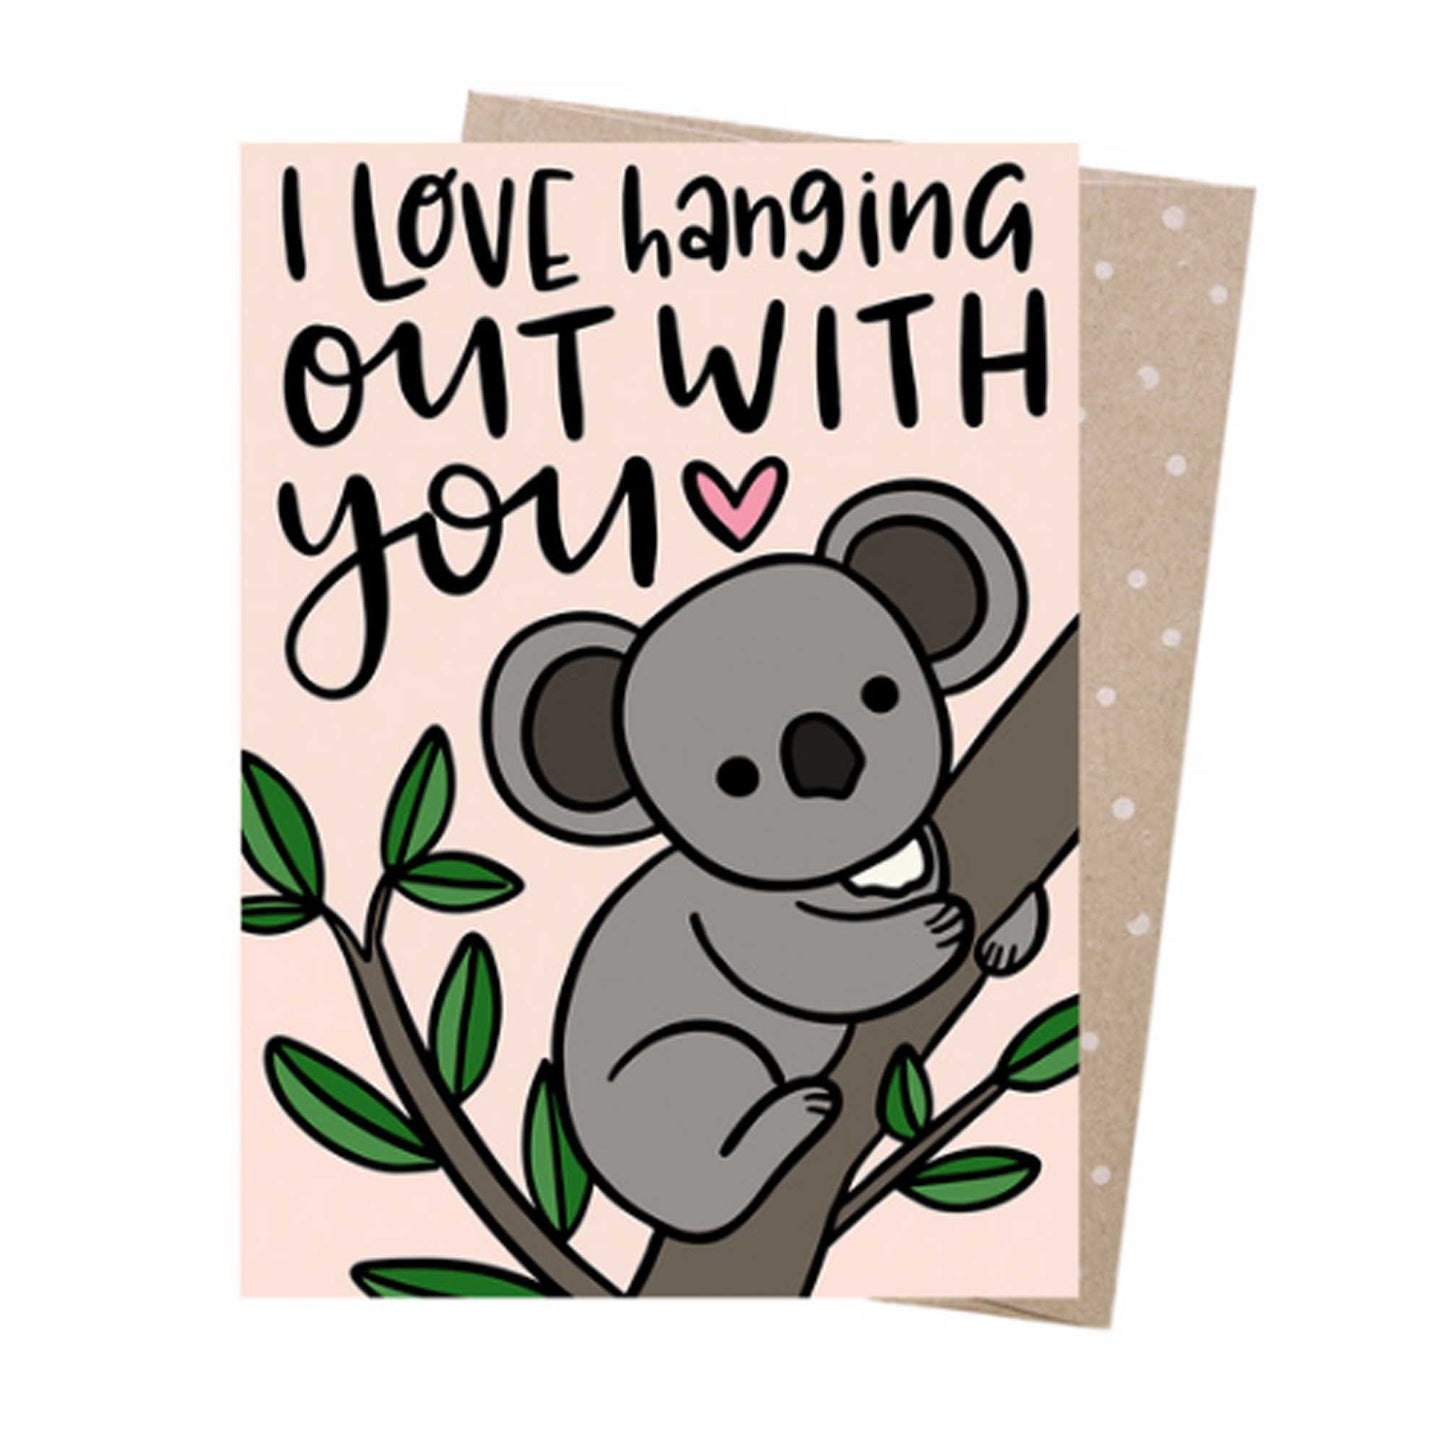 Earth Greetings I love hanging out with you eco-friendly valentine's gift card. Diminish.